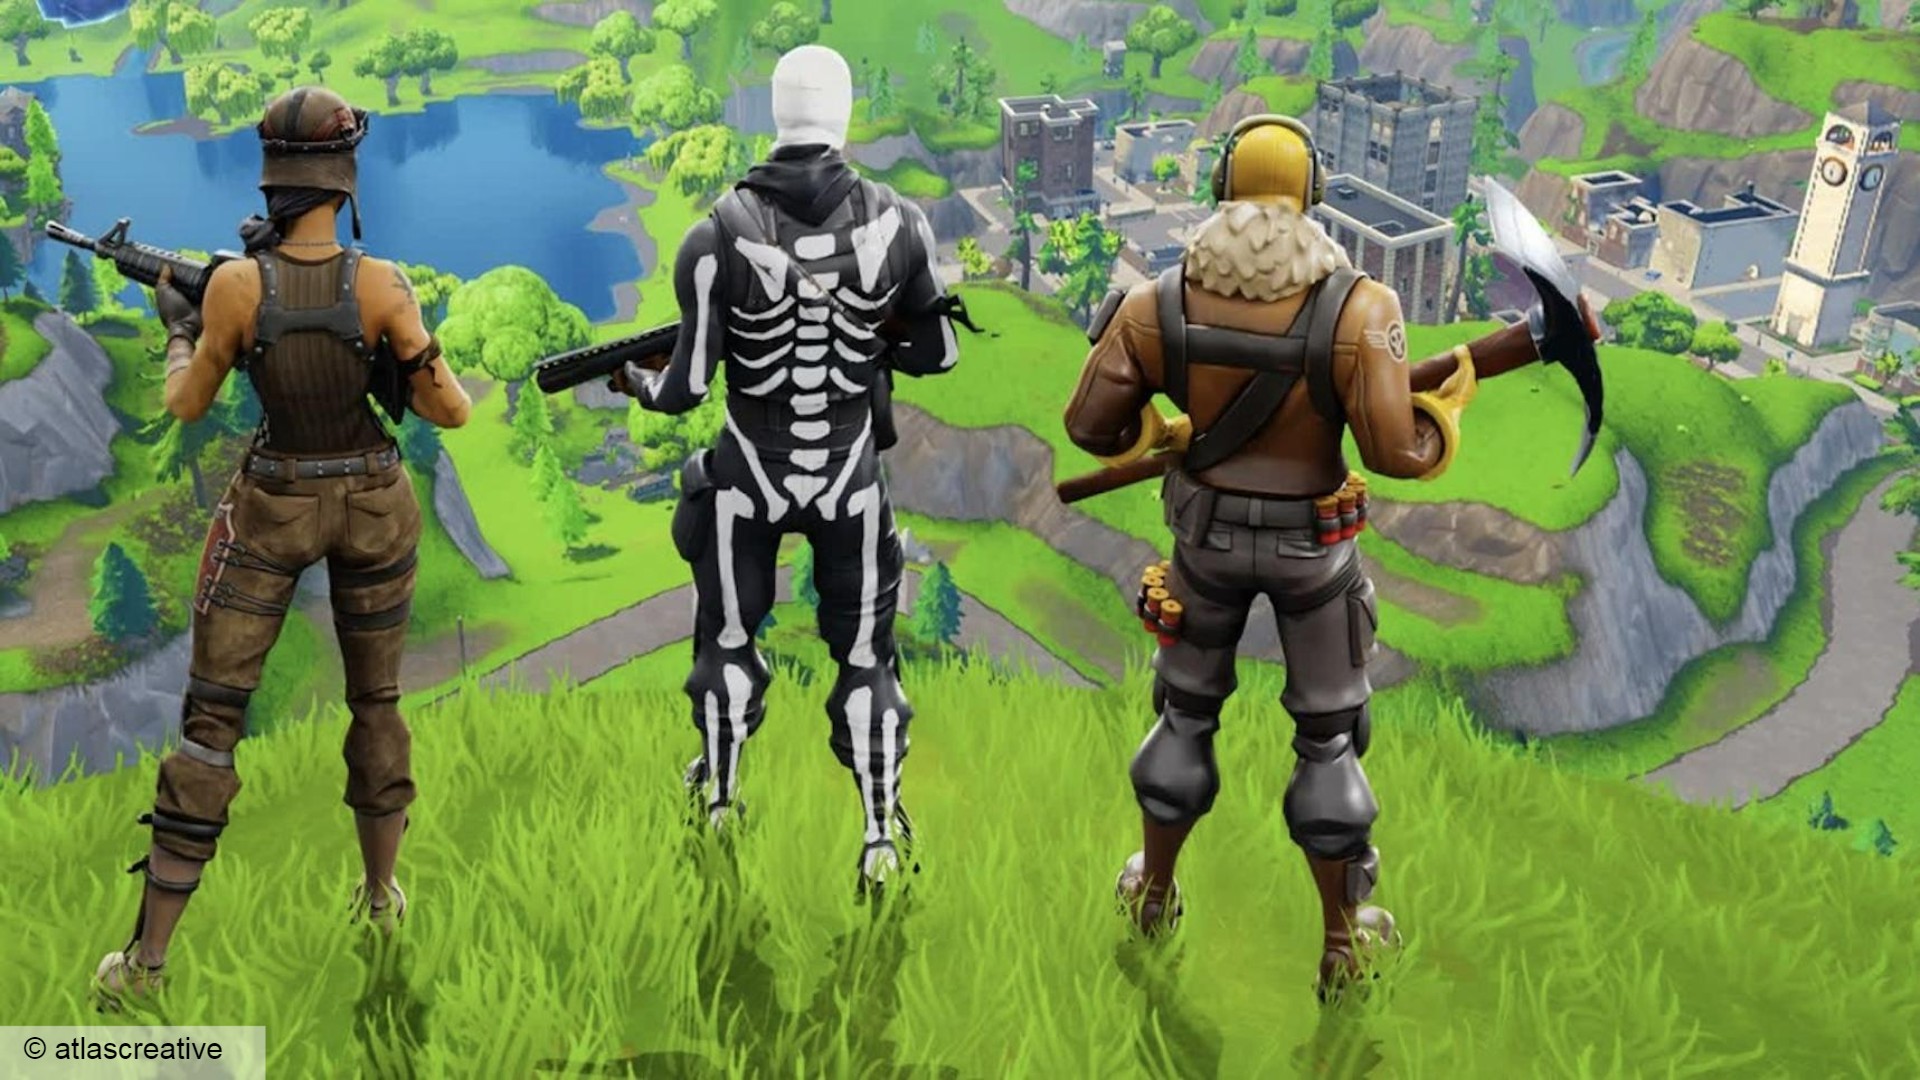 The original Fortnite map is already playable – you don't have to wait